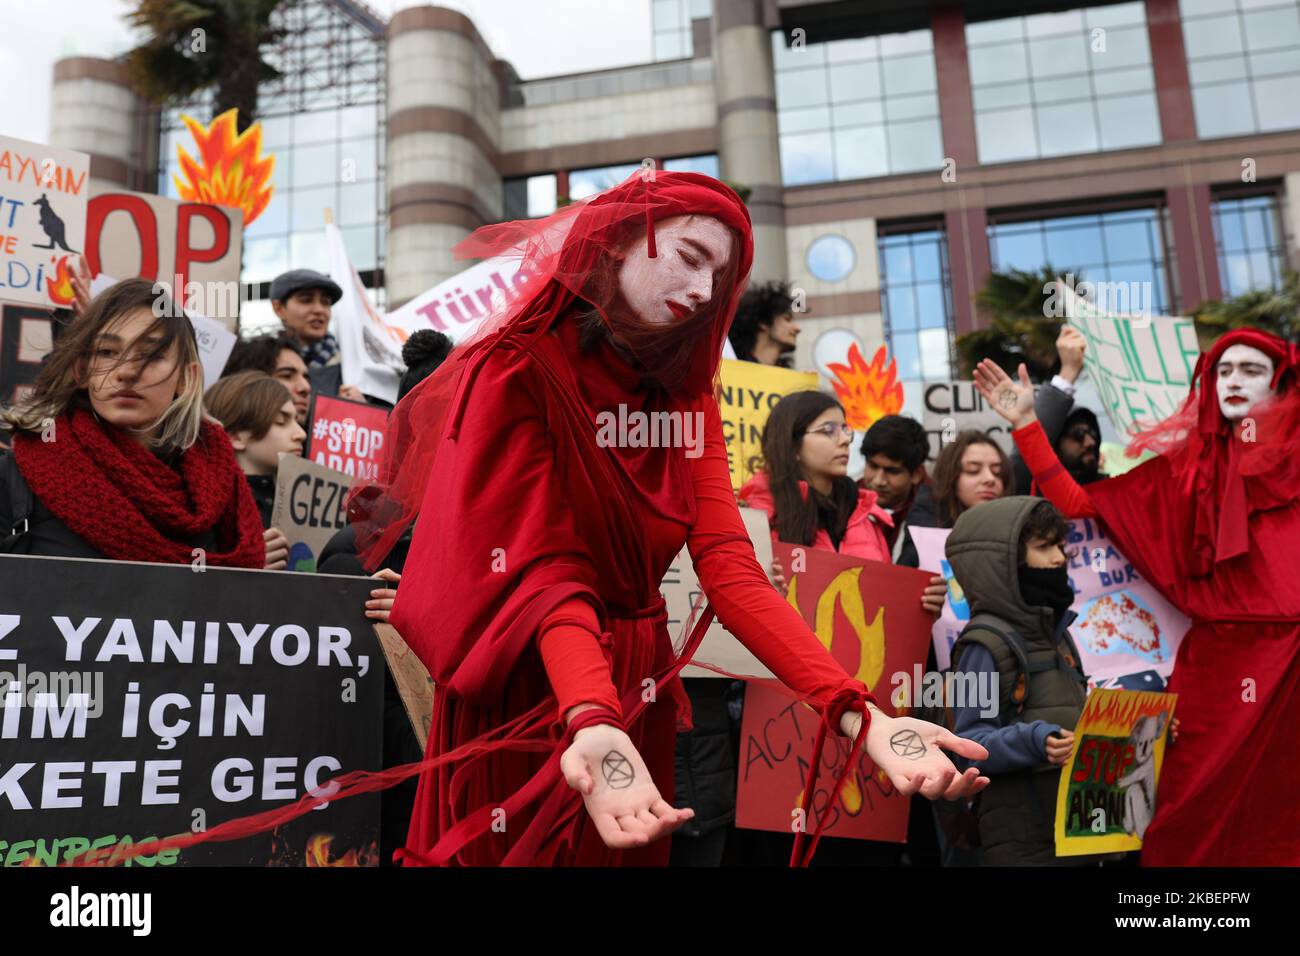 Students in Istanbul gathered for a protest in front of the Australian Consulate in Istanbul on January 17, 2020, in relation to the recent fires in Australia and the climate crisis. The demonstration was organized by Fridays for Future Turkey, and was supported by the ecologist groups Extinction Rebellion Turkey, Zero Future Campaign, HAYDI, Istanbul Vegan Initiative and Eco Student. Representation of the Red Brigades seen during the demonstration. (Photo by Erhan Demirtas/NurPhoto) Stock Photo